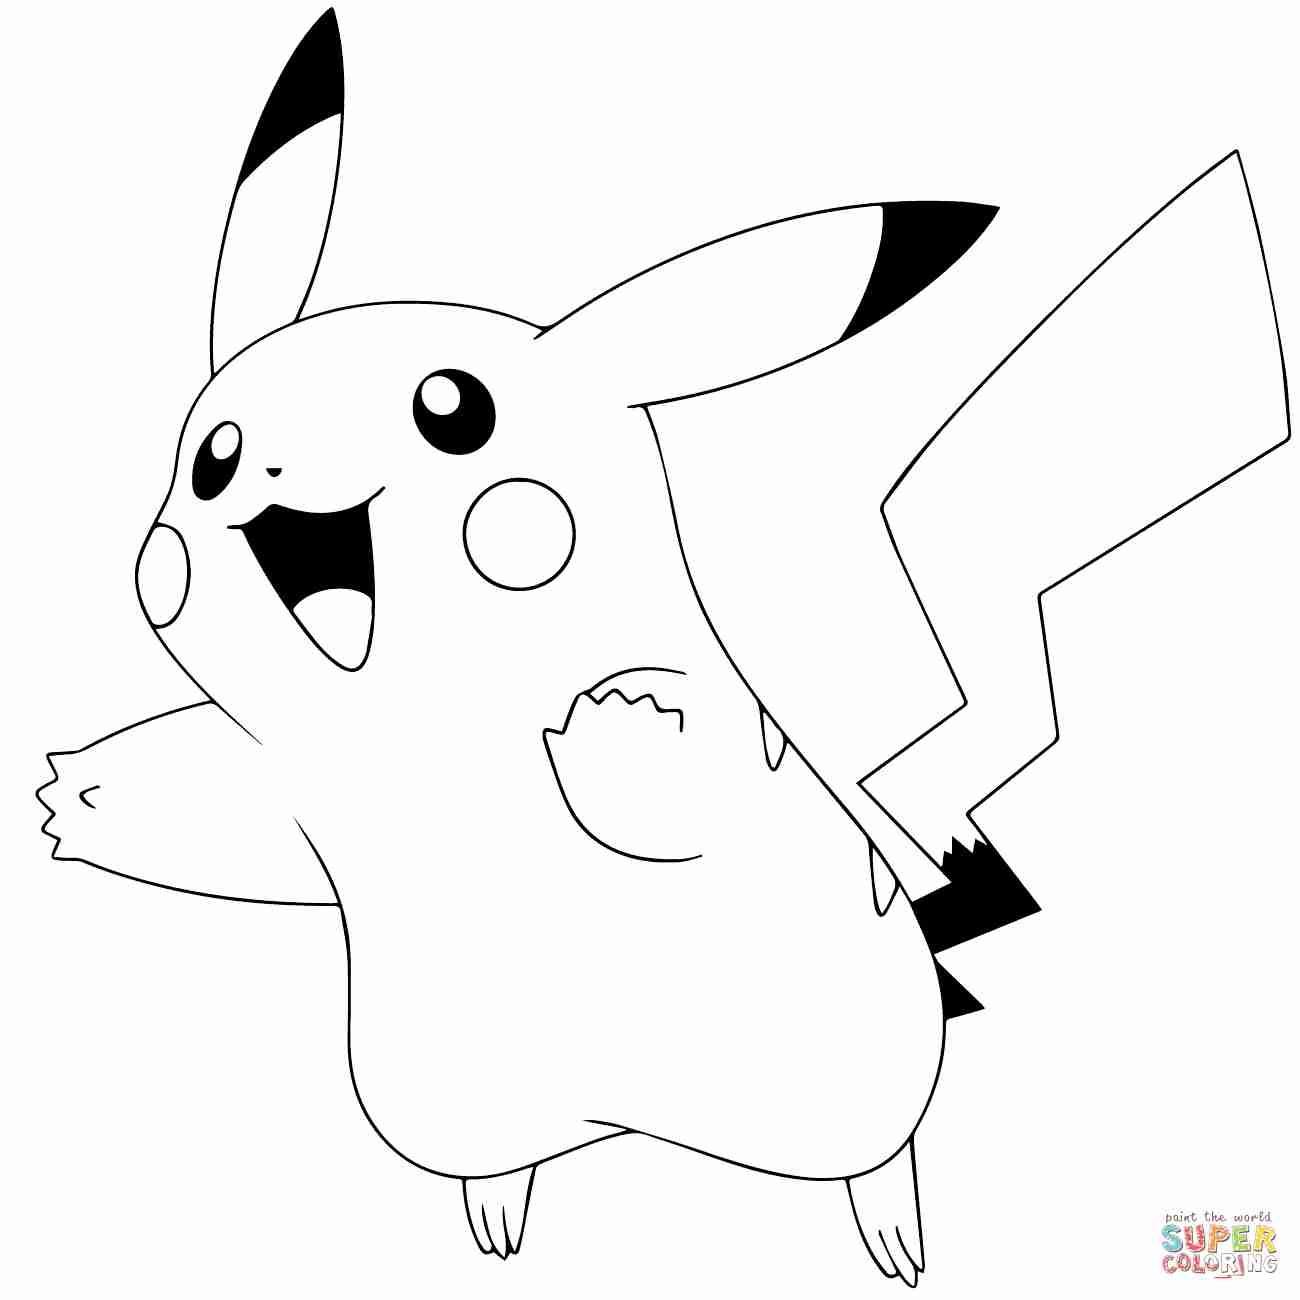 Cute Pikachu Coloring Pages at GetColorings.com | Free printable